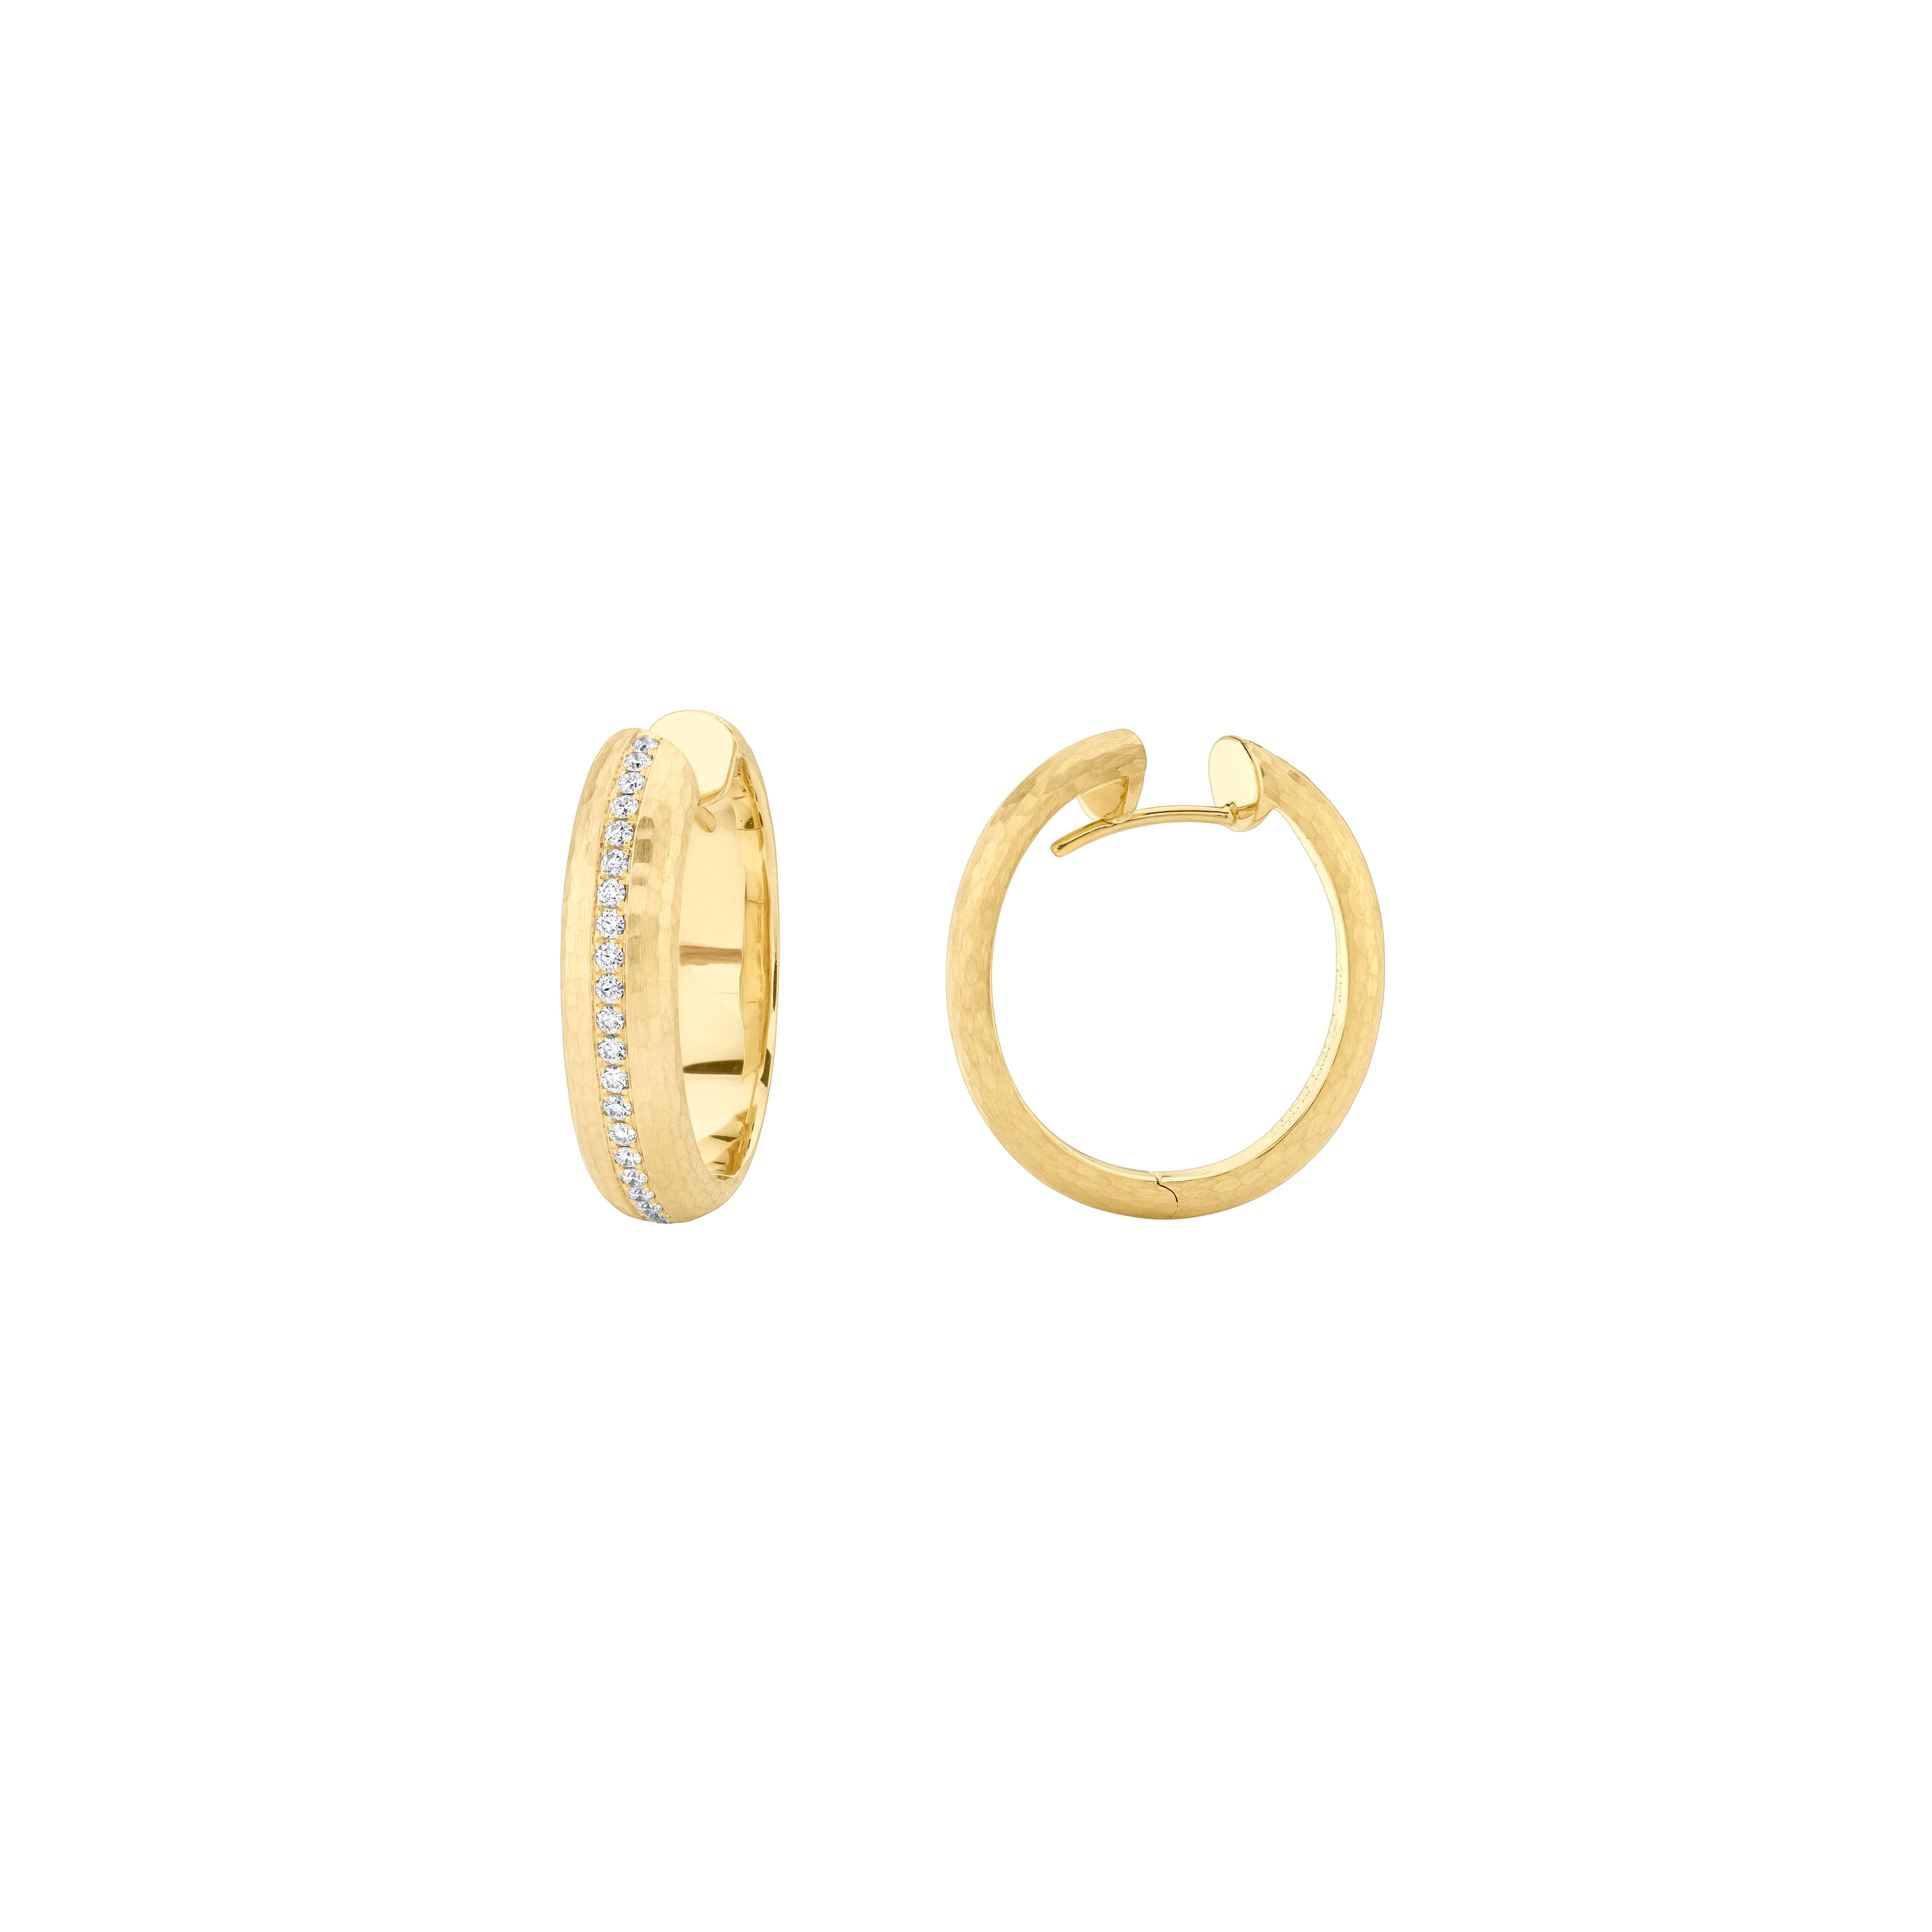 Style #: XH20H.
SYLVIA KONTENTE  18K Yellow gold diamond hoop earrings with hammered finish.
Precision-cut, round brilliant diamonds.
Diamond total weight: 0.38ct tw.
Diamond color/clarity: DEF/VVS VS.
Hammered finish.
High-end construction.
Size: